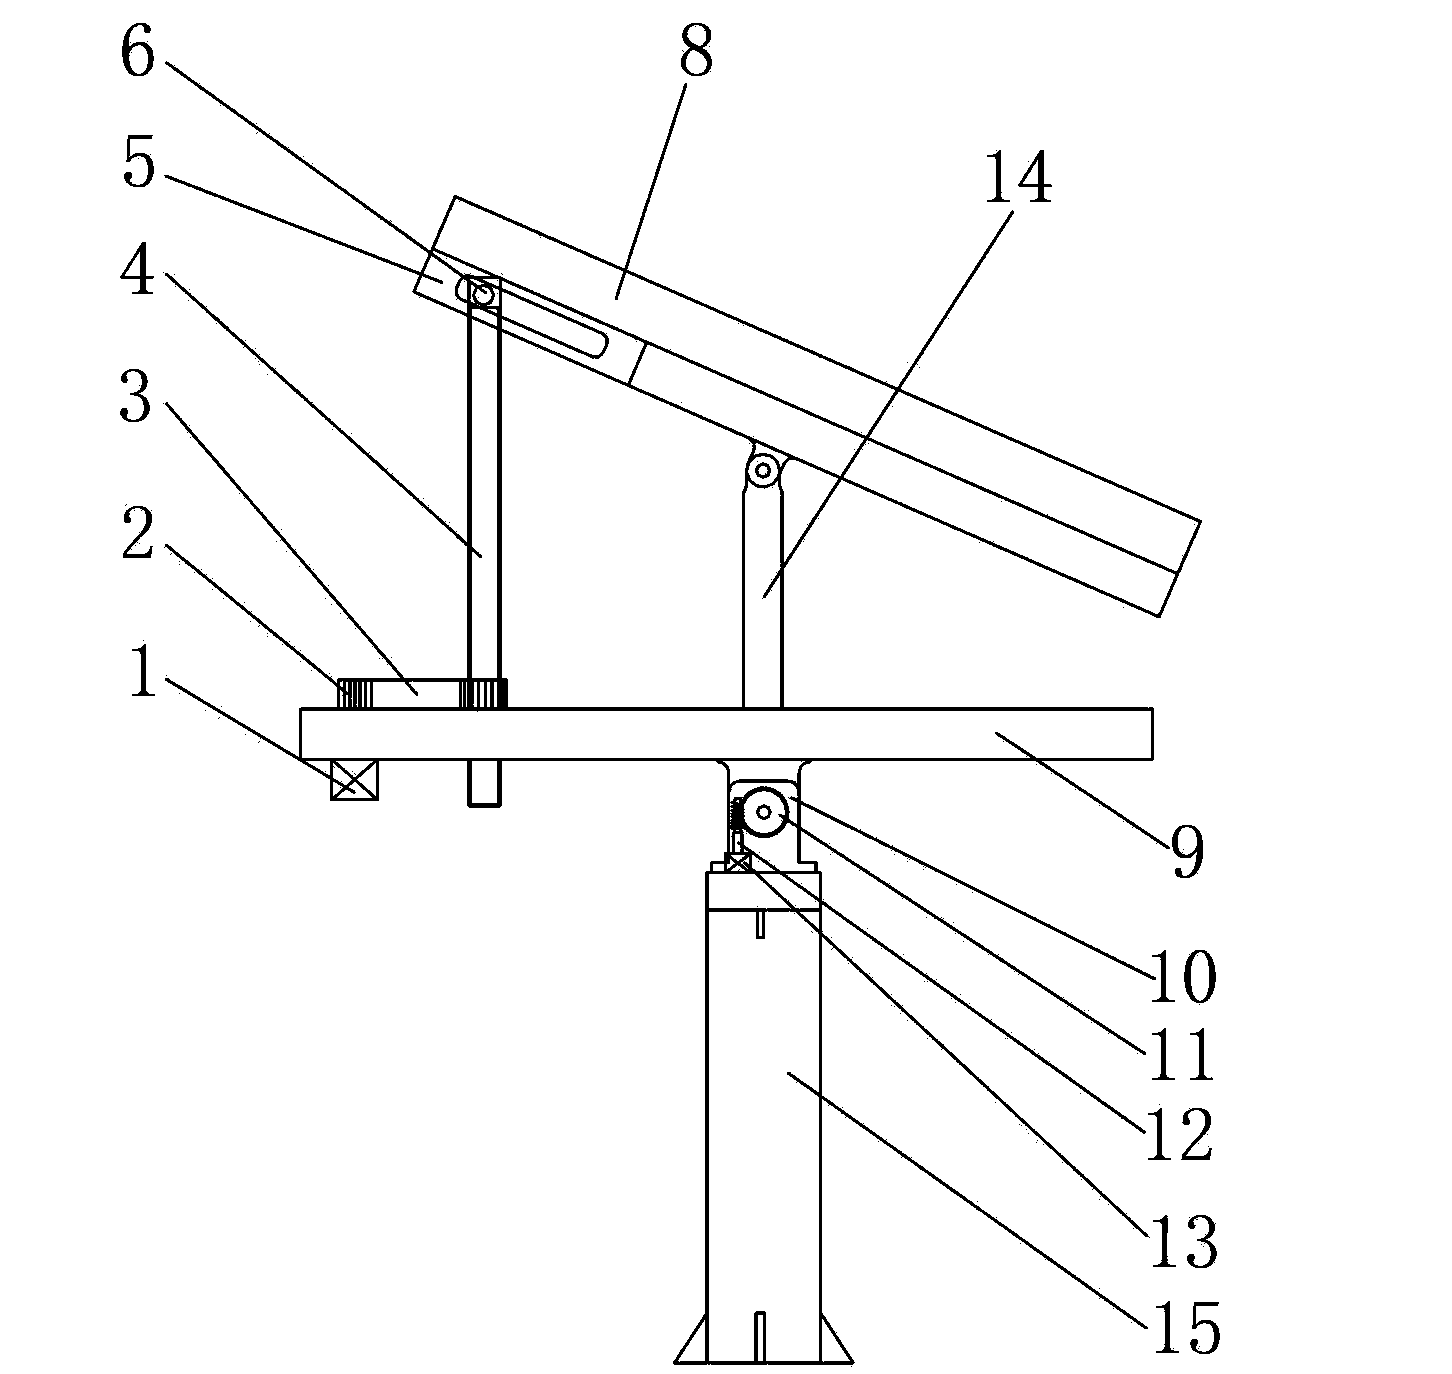 Pitch angle regulating mechanism of solar tracking device based on rotation of earth